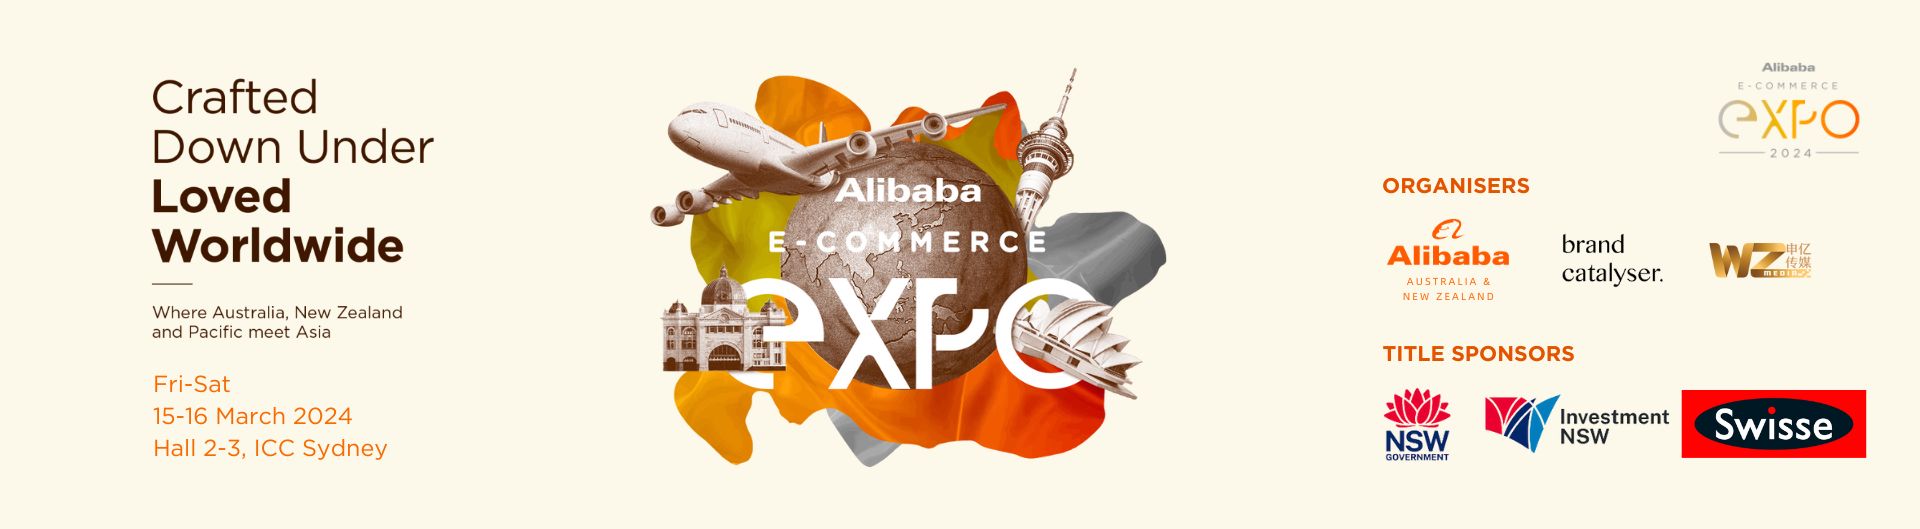 Alibaba E-Commerce Expo is coming to ICC Sydney on 15 to 16 March 2024.